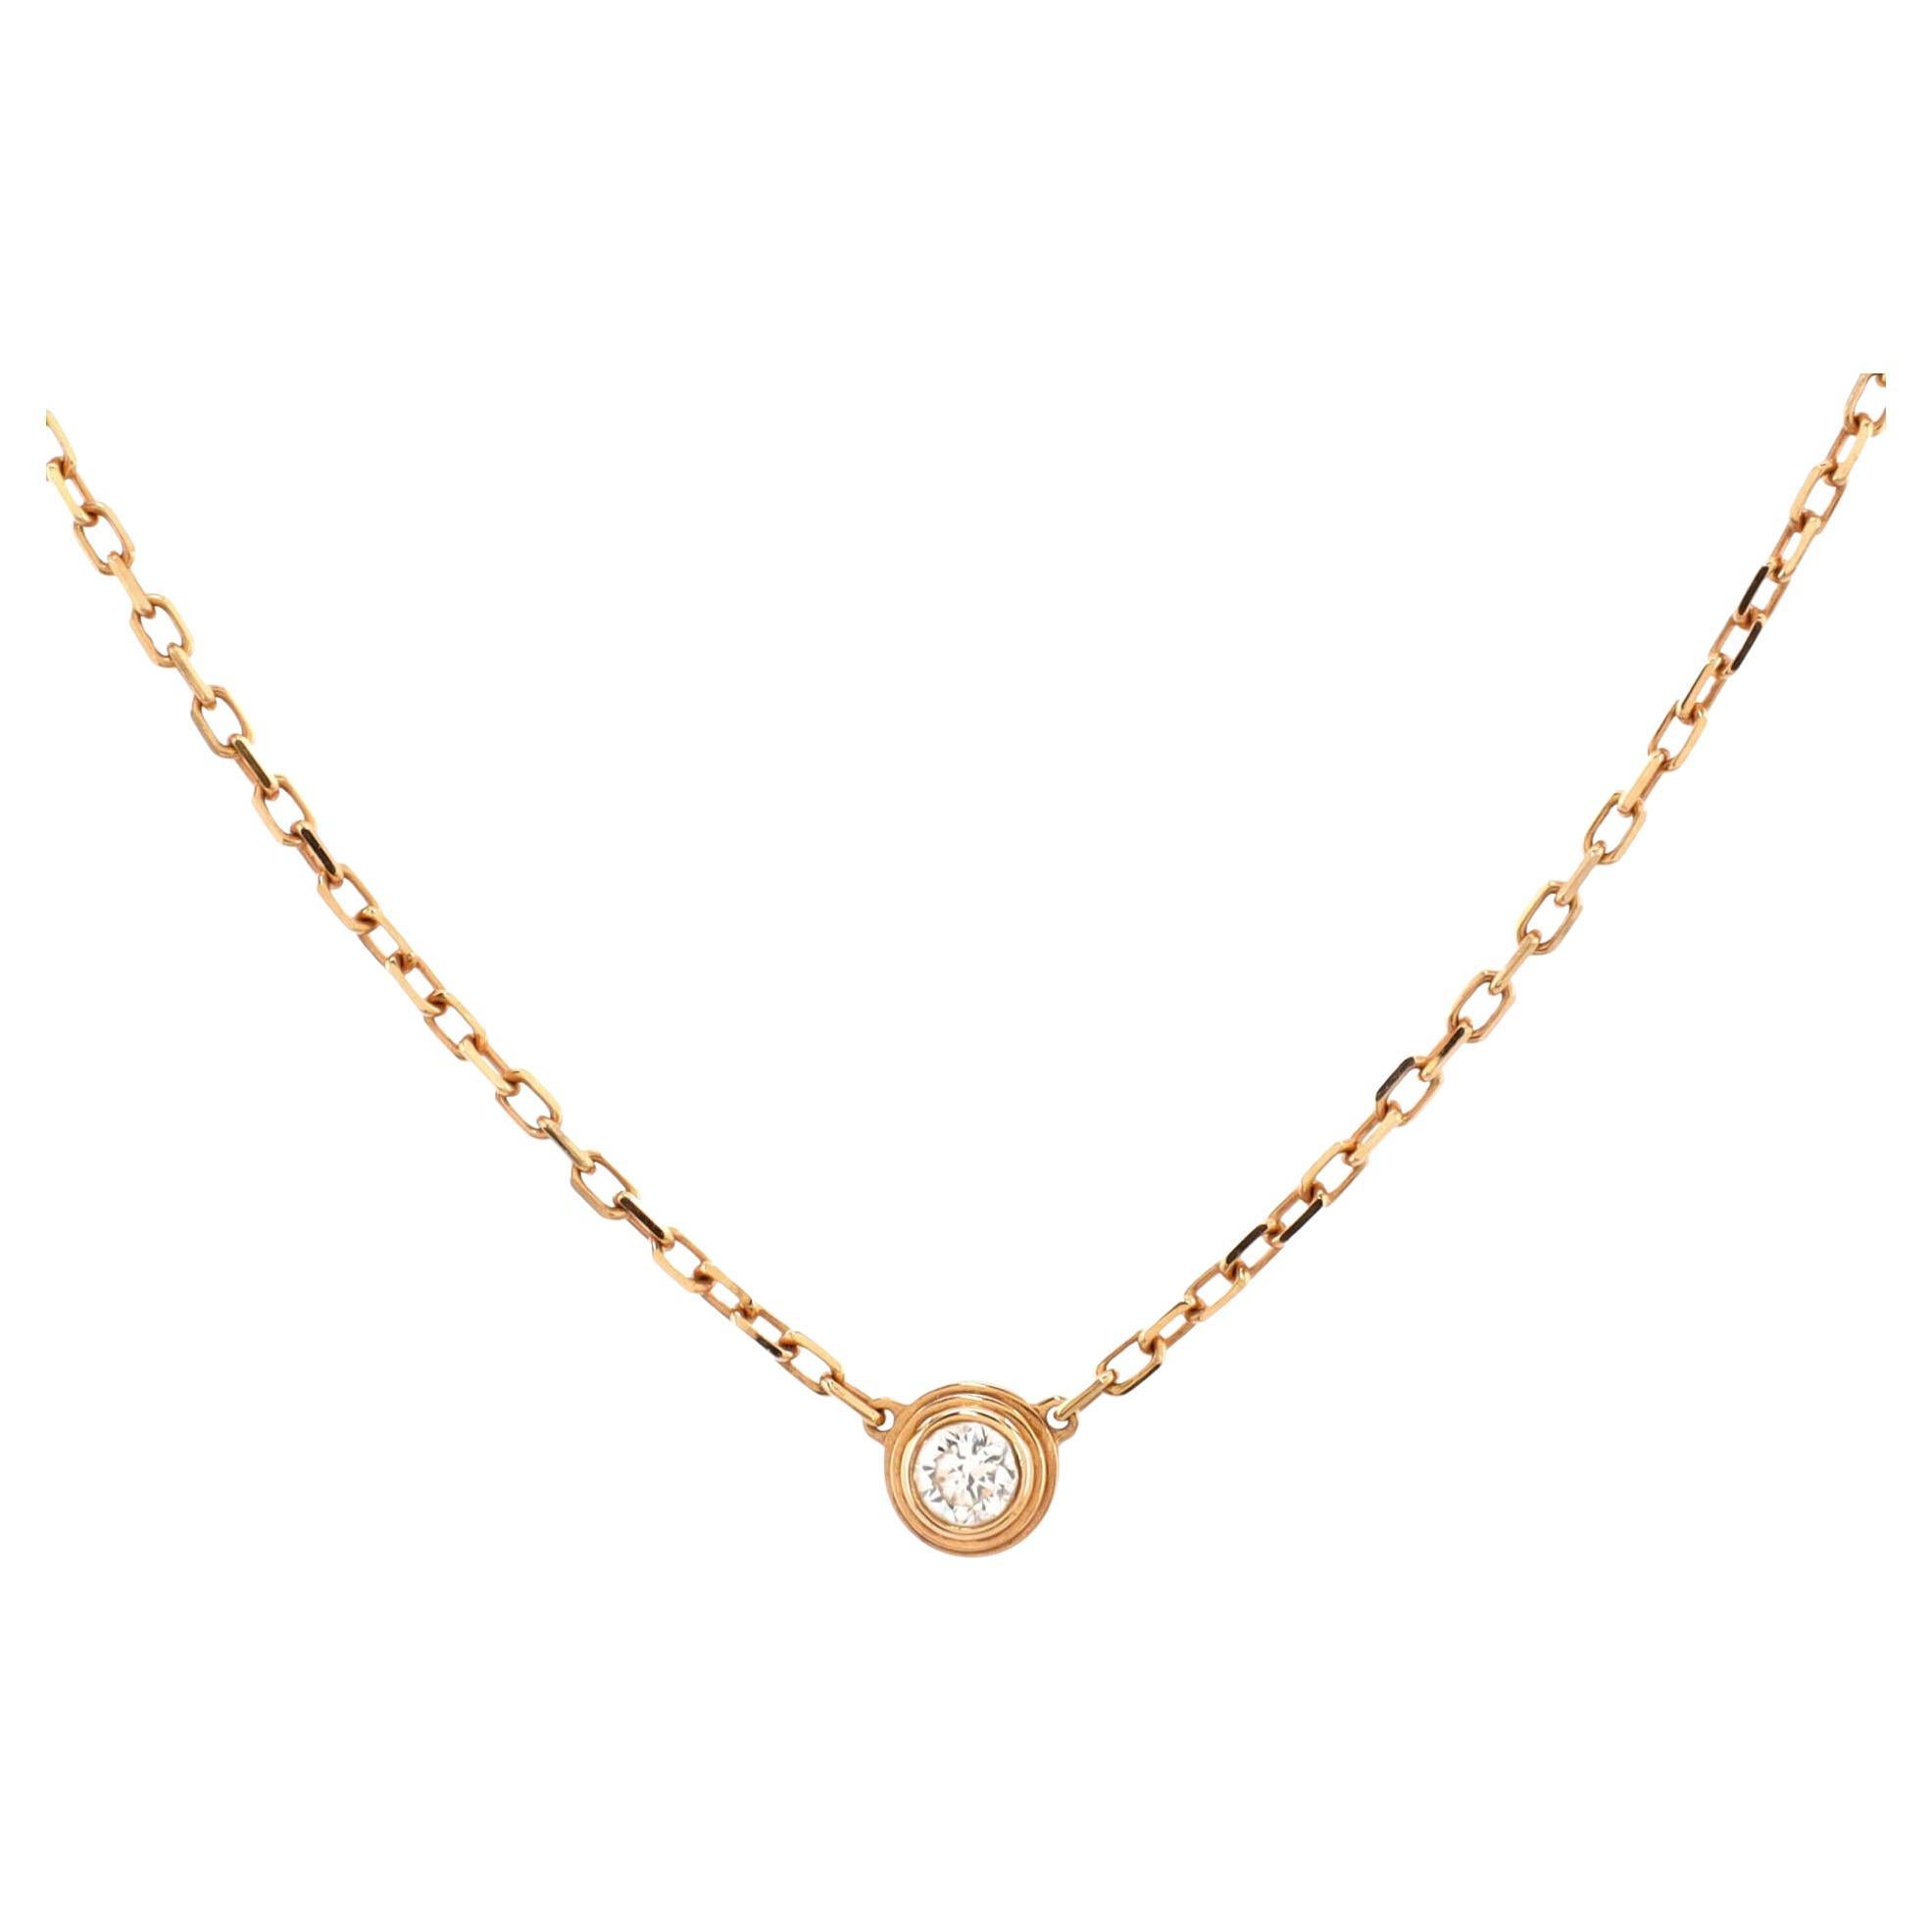 Cartier Cartier D'amour Pendant Necklace 18k Rose Gold with Diamond Small